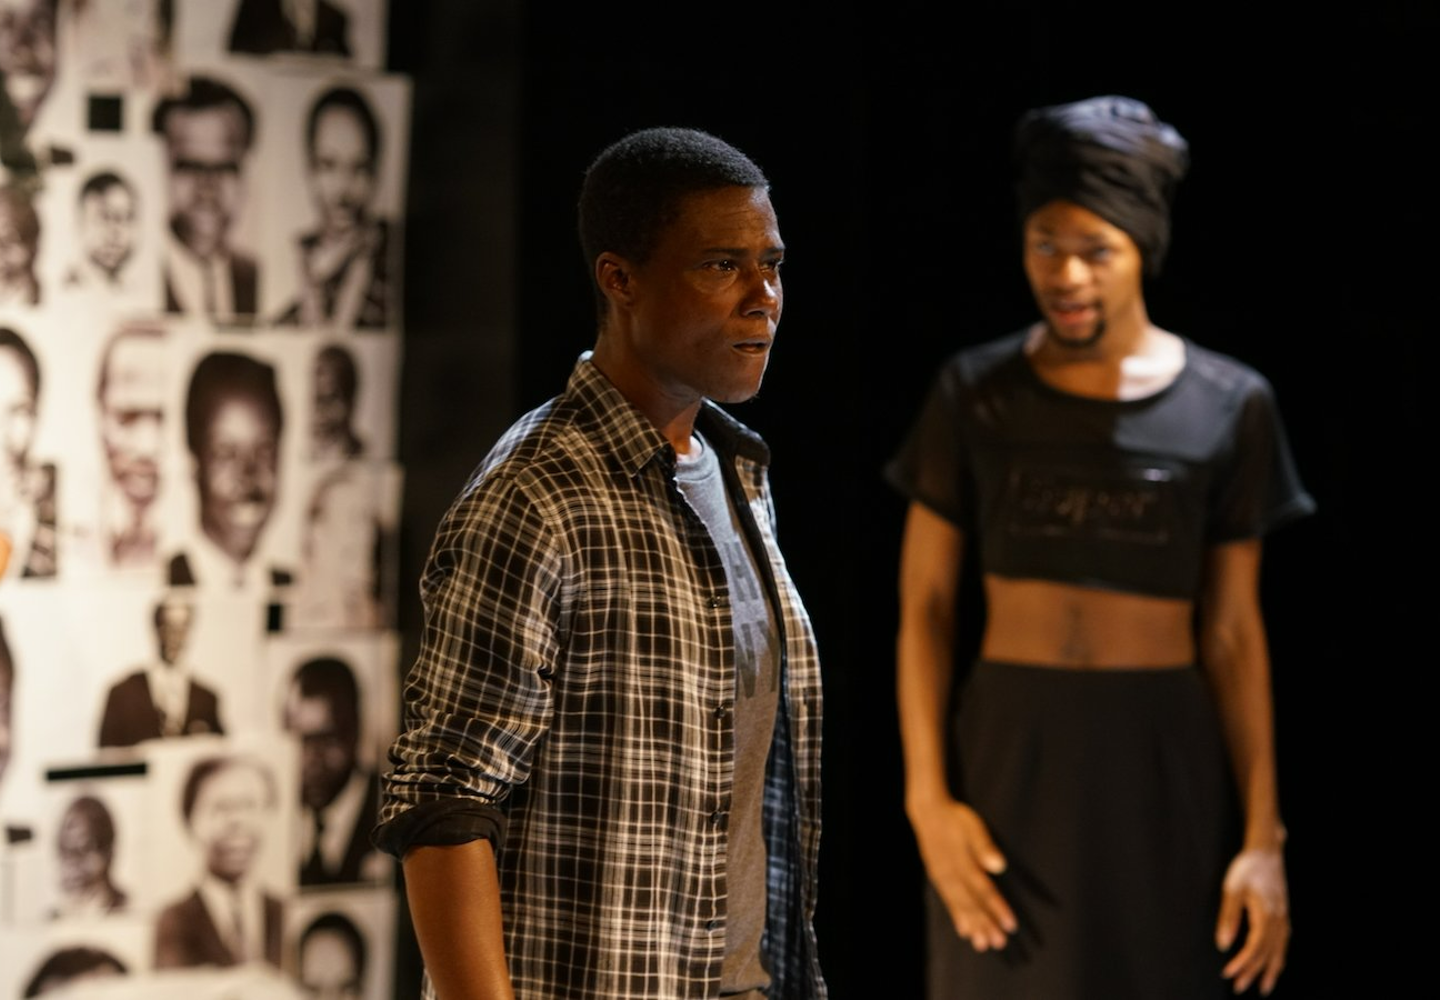 Criminal Queerness Festival: The Survival by Achiro P. Olwoch, directed by Jacob Basri